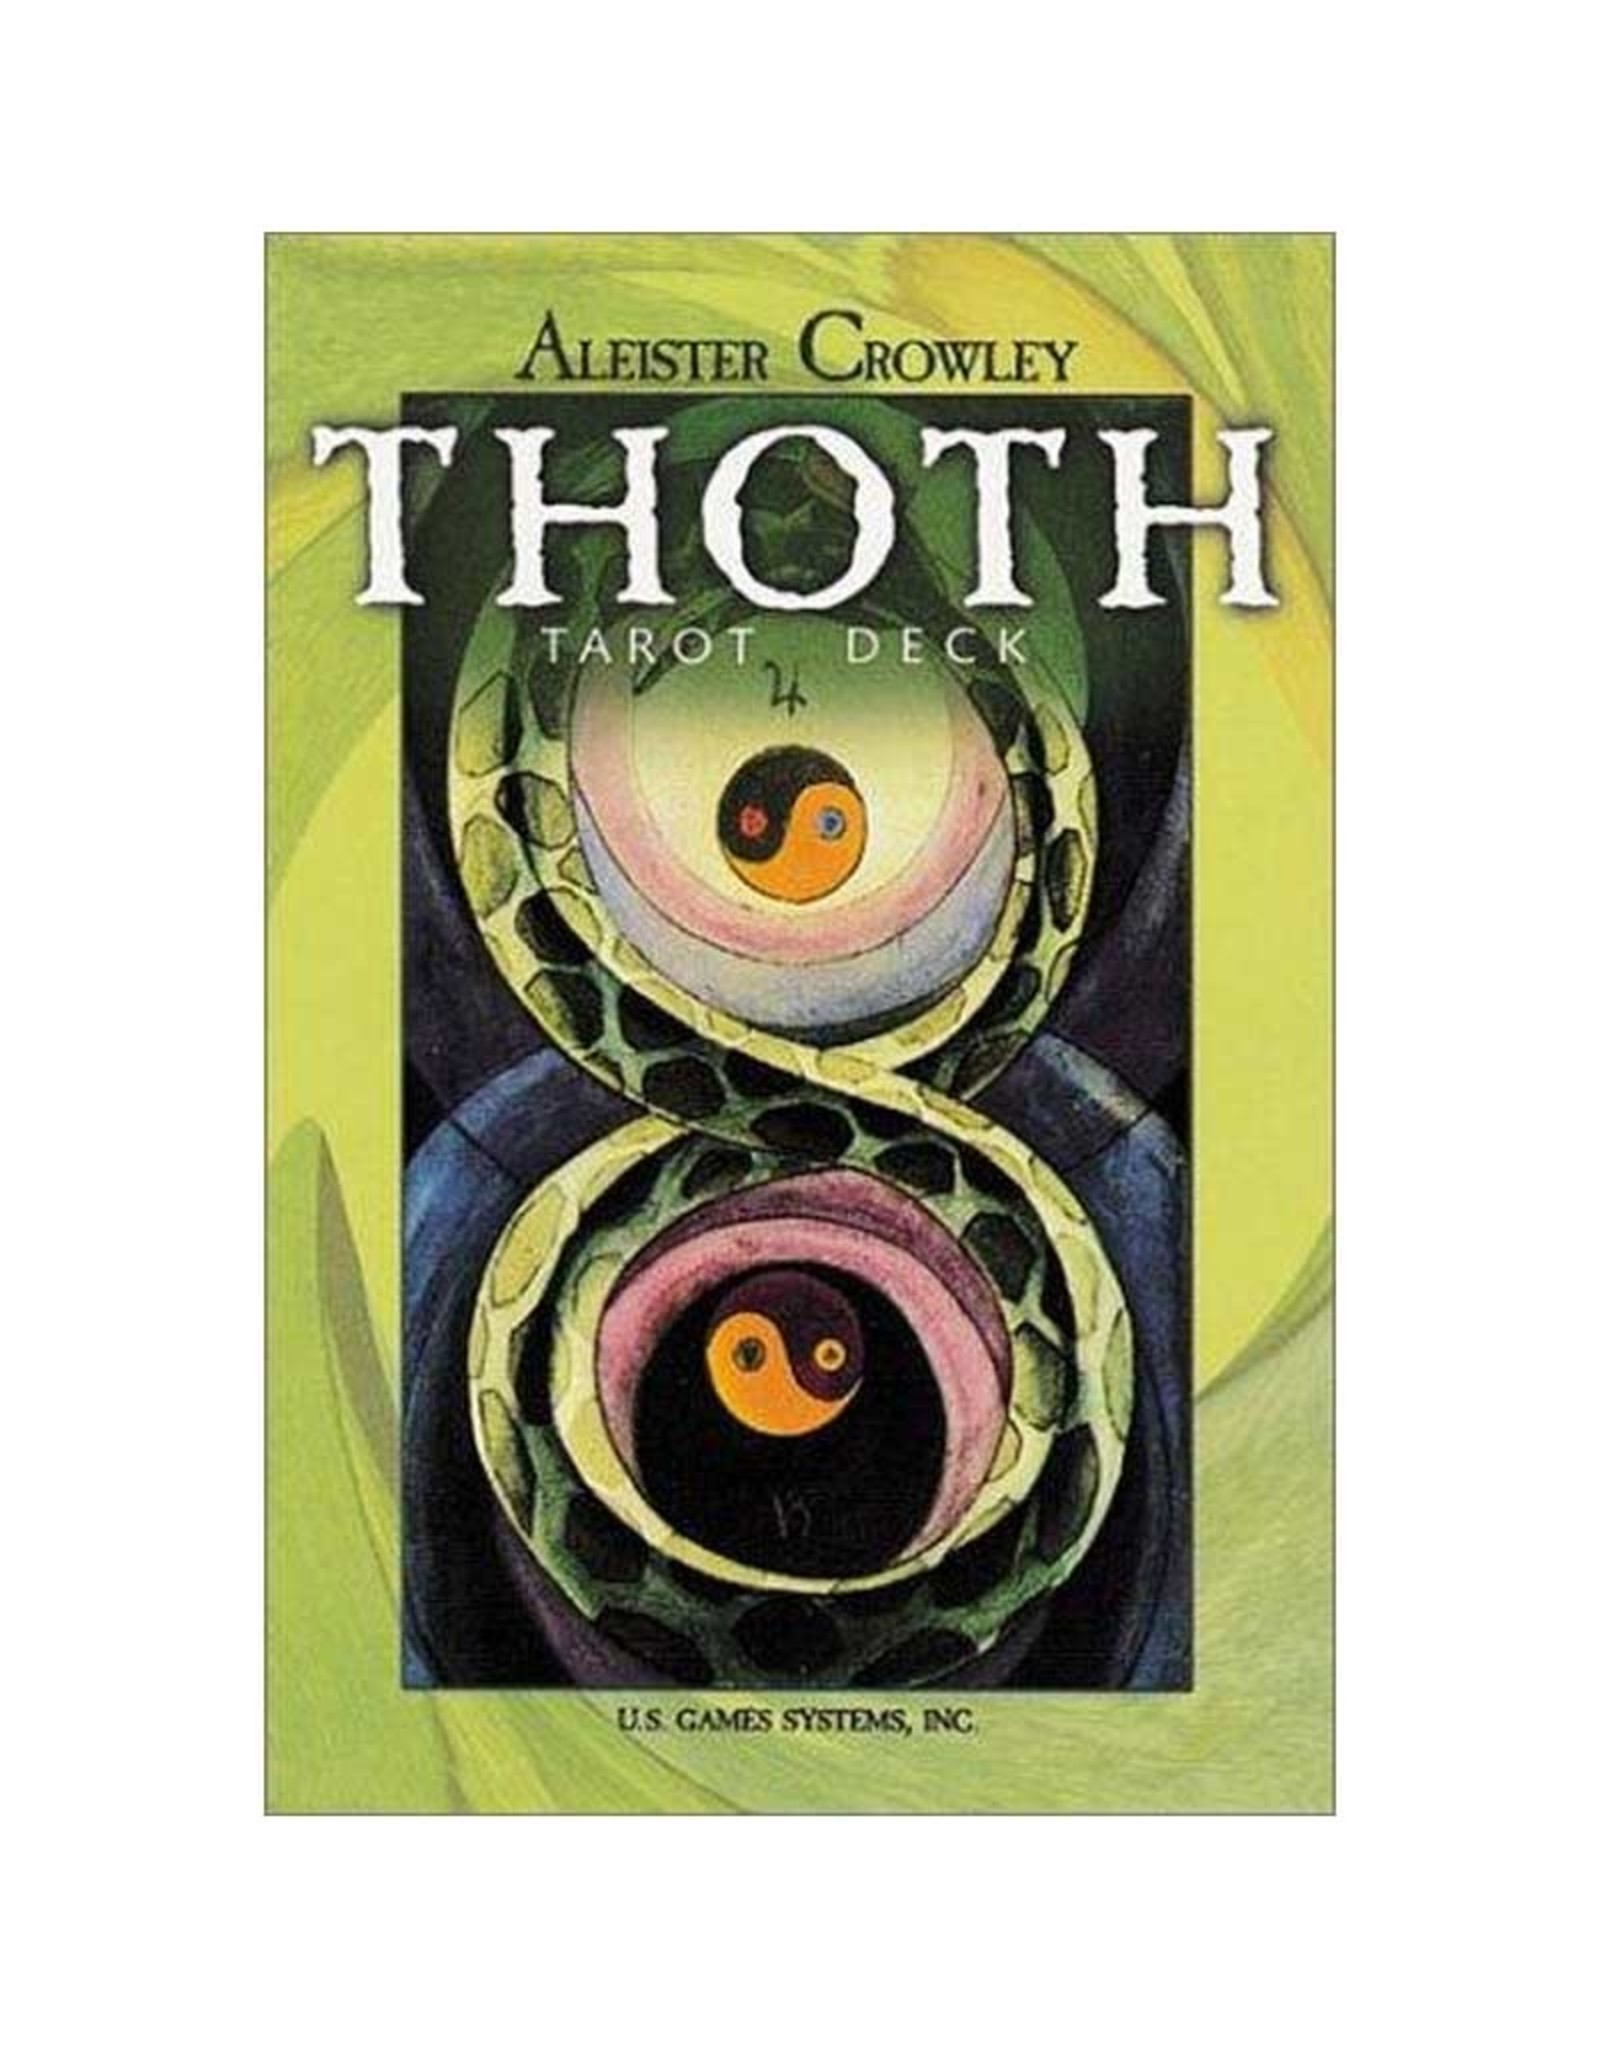 Aleister Crowley Thoth Large Tarot by Aleister Crowley